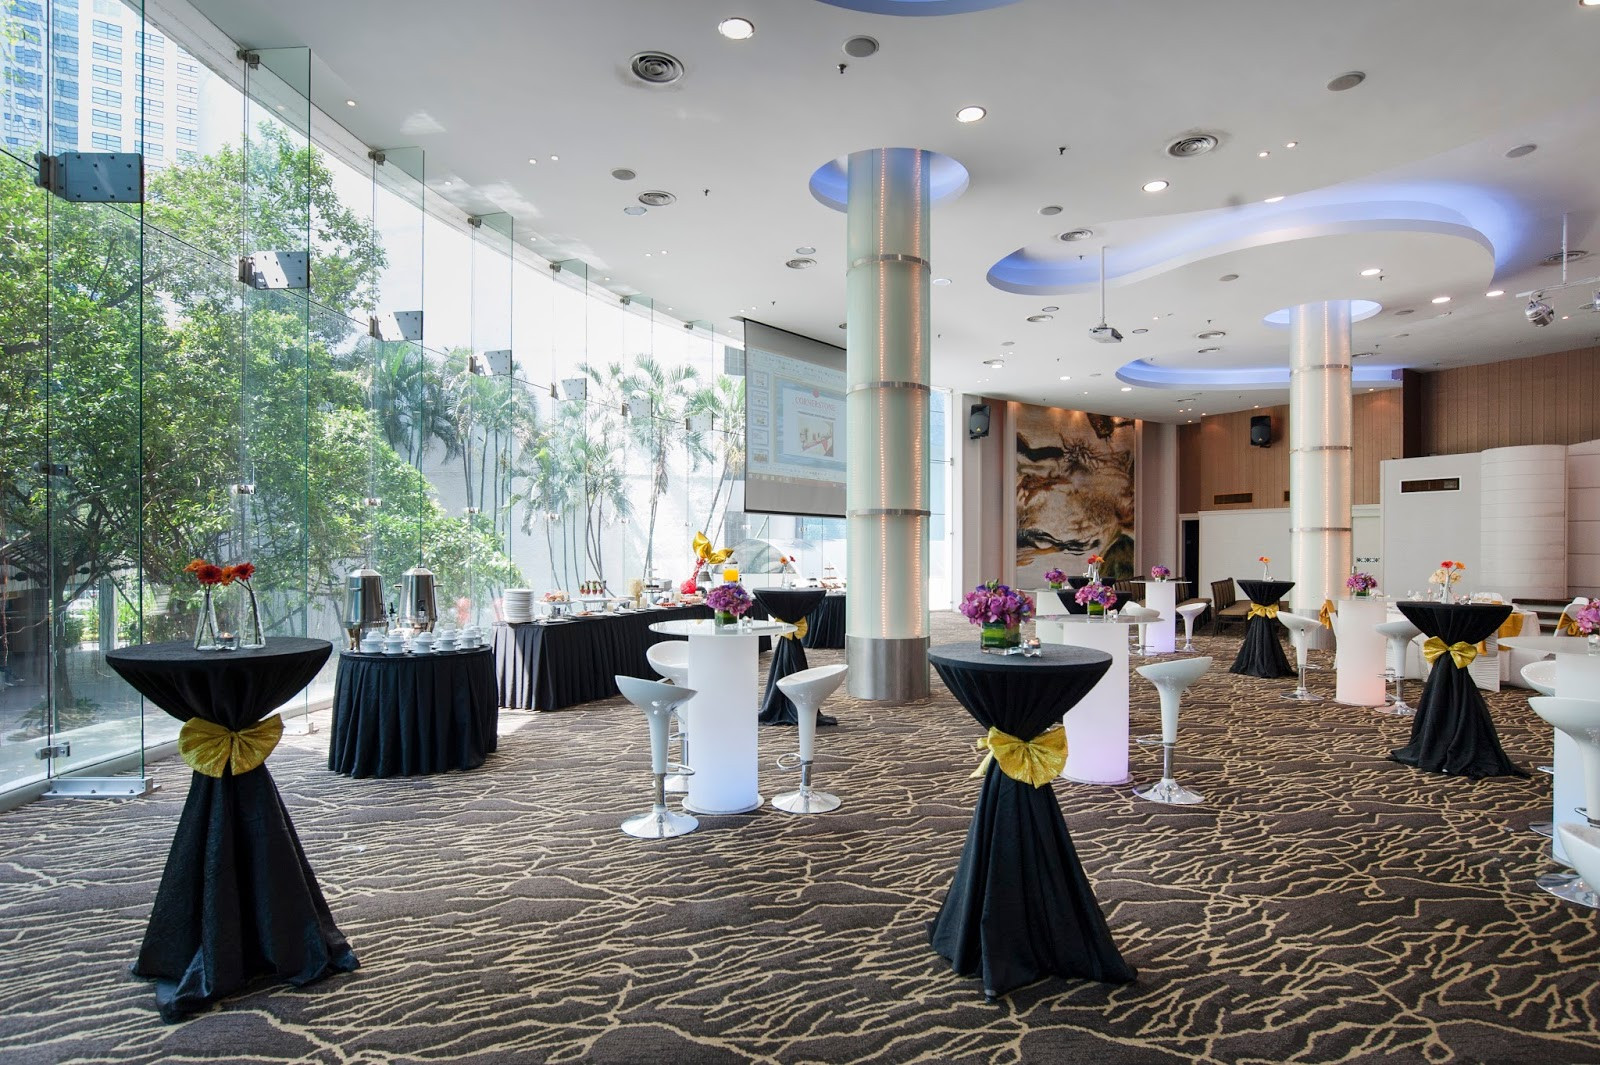 Engagement Party Venue Ideas
 Top 5 Places for Garden Themed Wedding in KL with Air